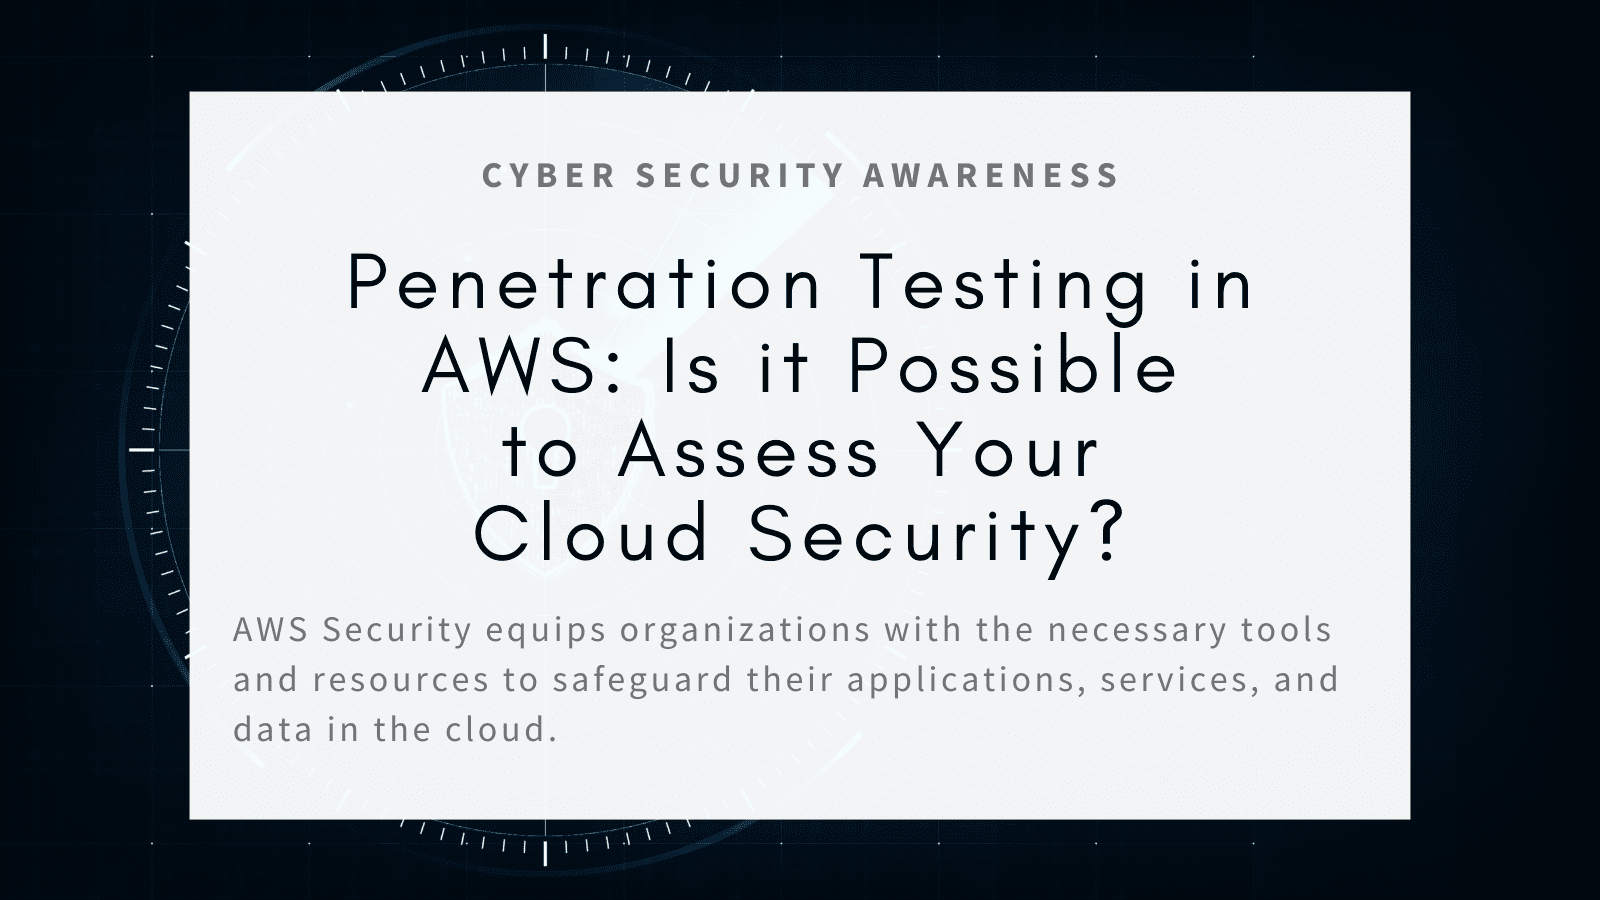 Penetration Testing in AWS: Is it Possible to Assess Your Cloud Security